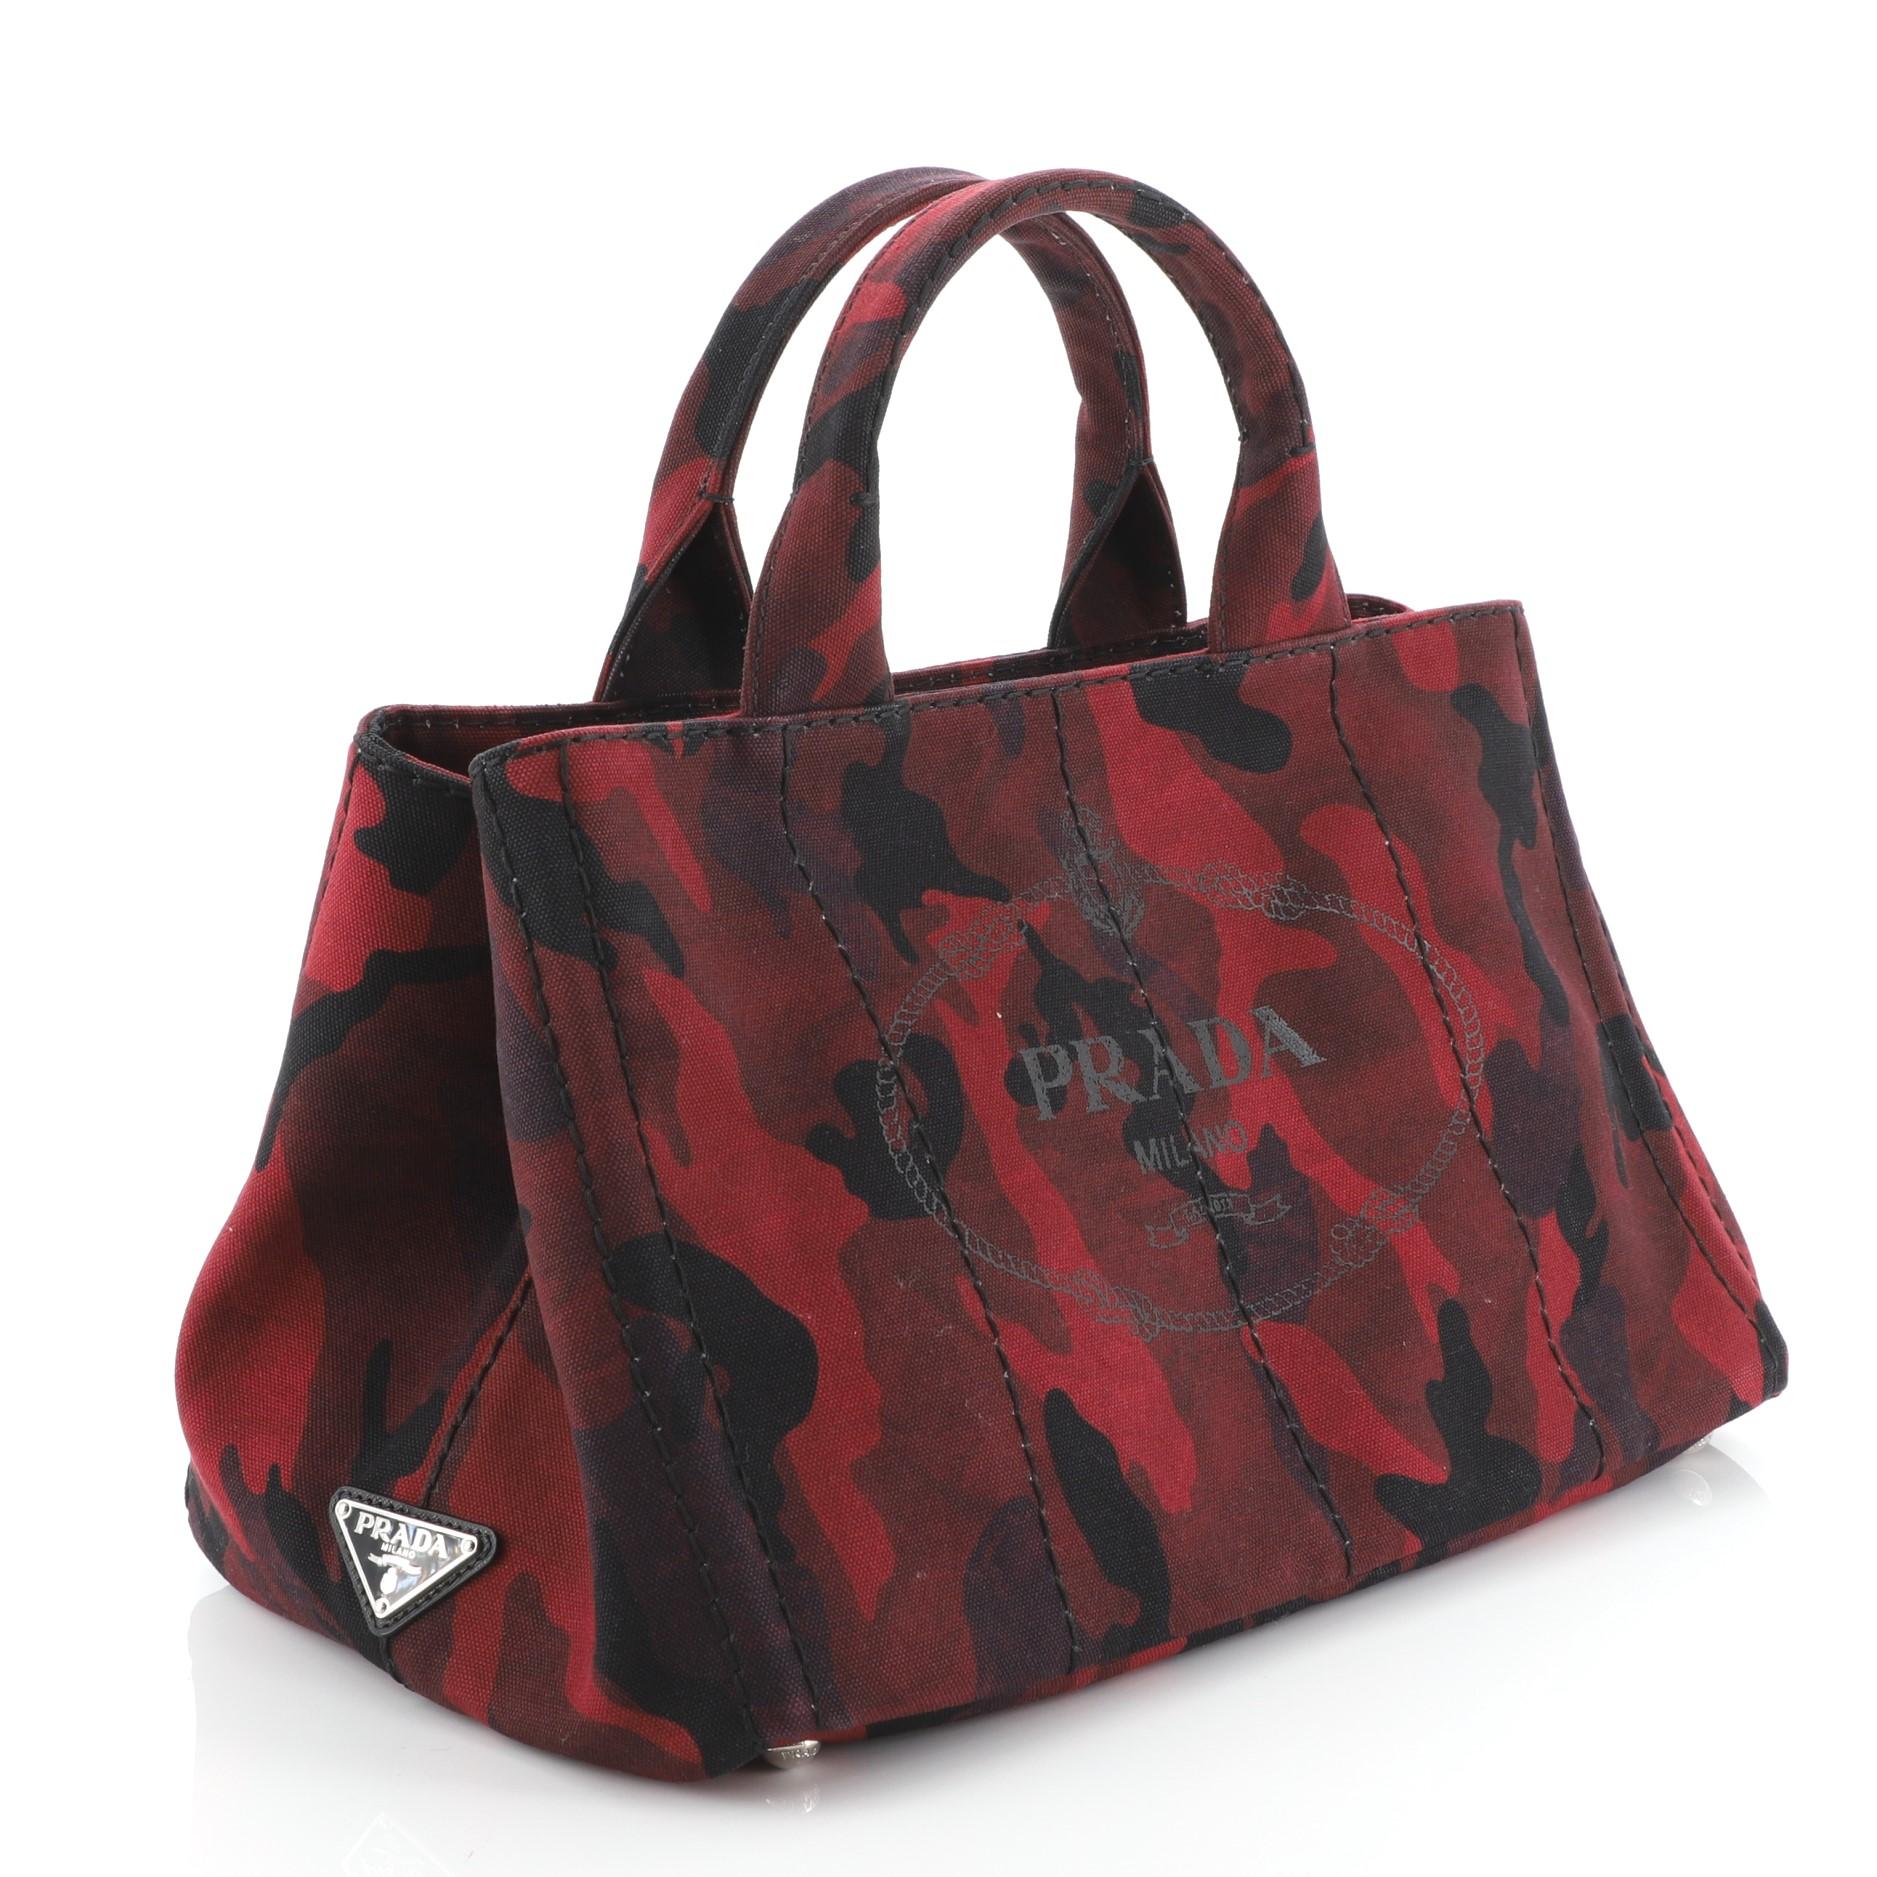 This Prada Canapa Convertible Tote Printed Canvas Medium, crafted from red printed canvas, features dual rolled handles, side snap buttons, and silver-tone hardware. It opens to a red fabric interior with zip and slip pockets. 

Estimated Retail